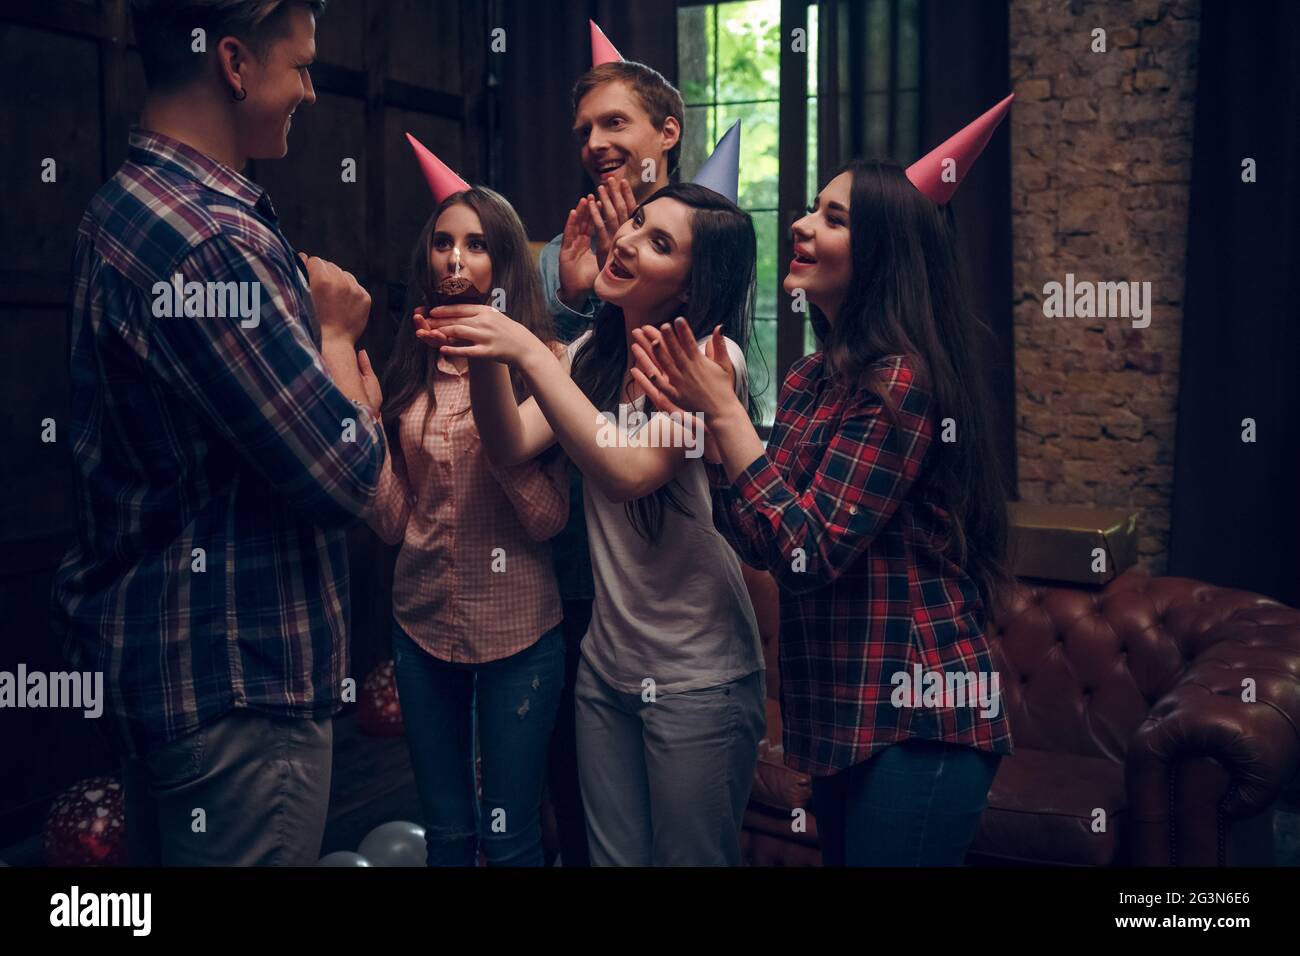 Friends congratulate their friend with birthday cake Stock Photo